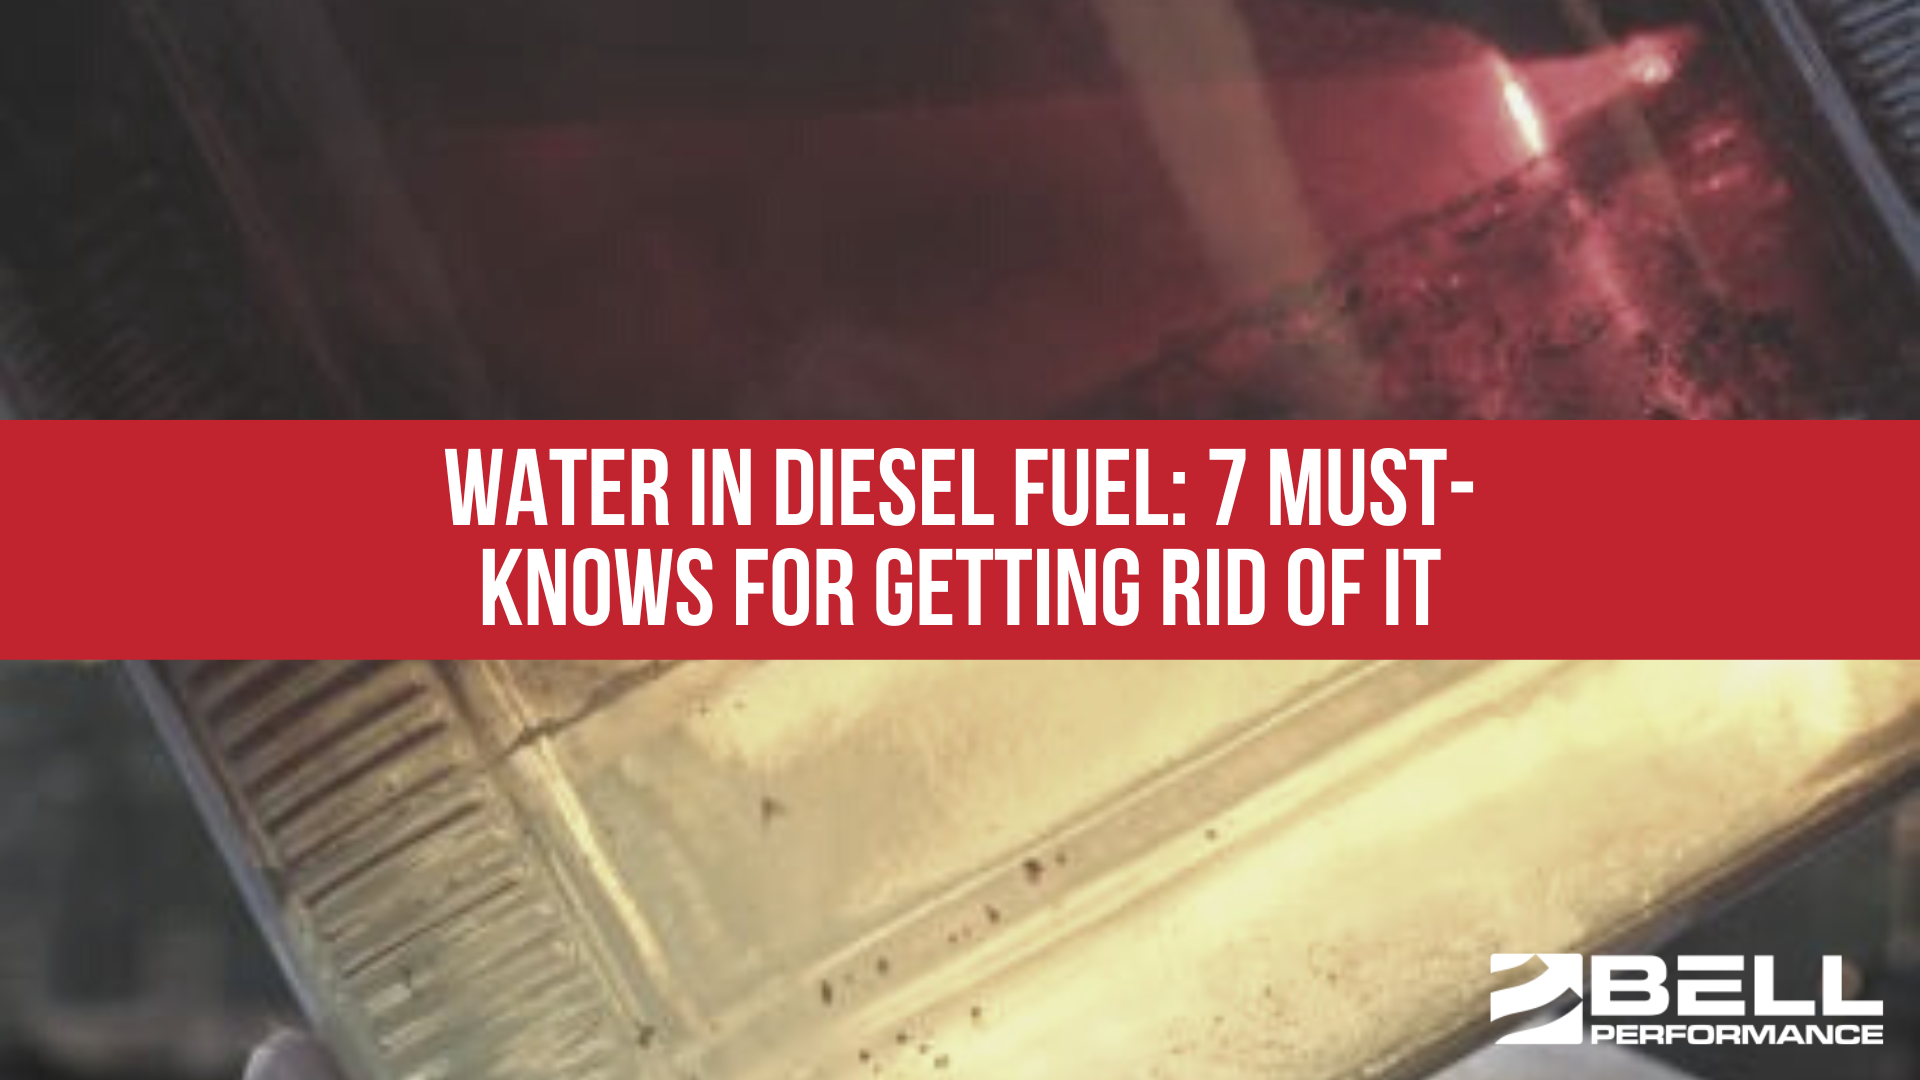 Water in Diesel Fuel: 7 Must-Knows For Getting Rid of It